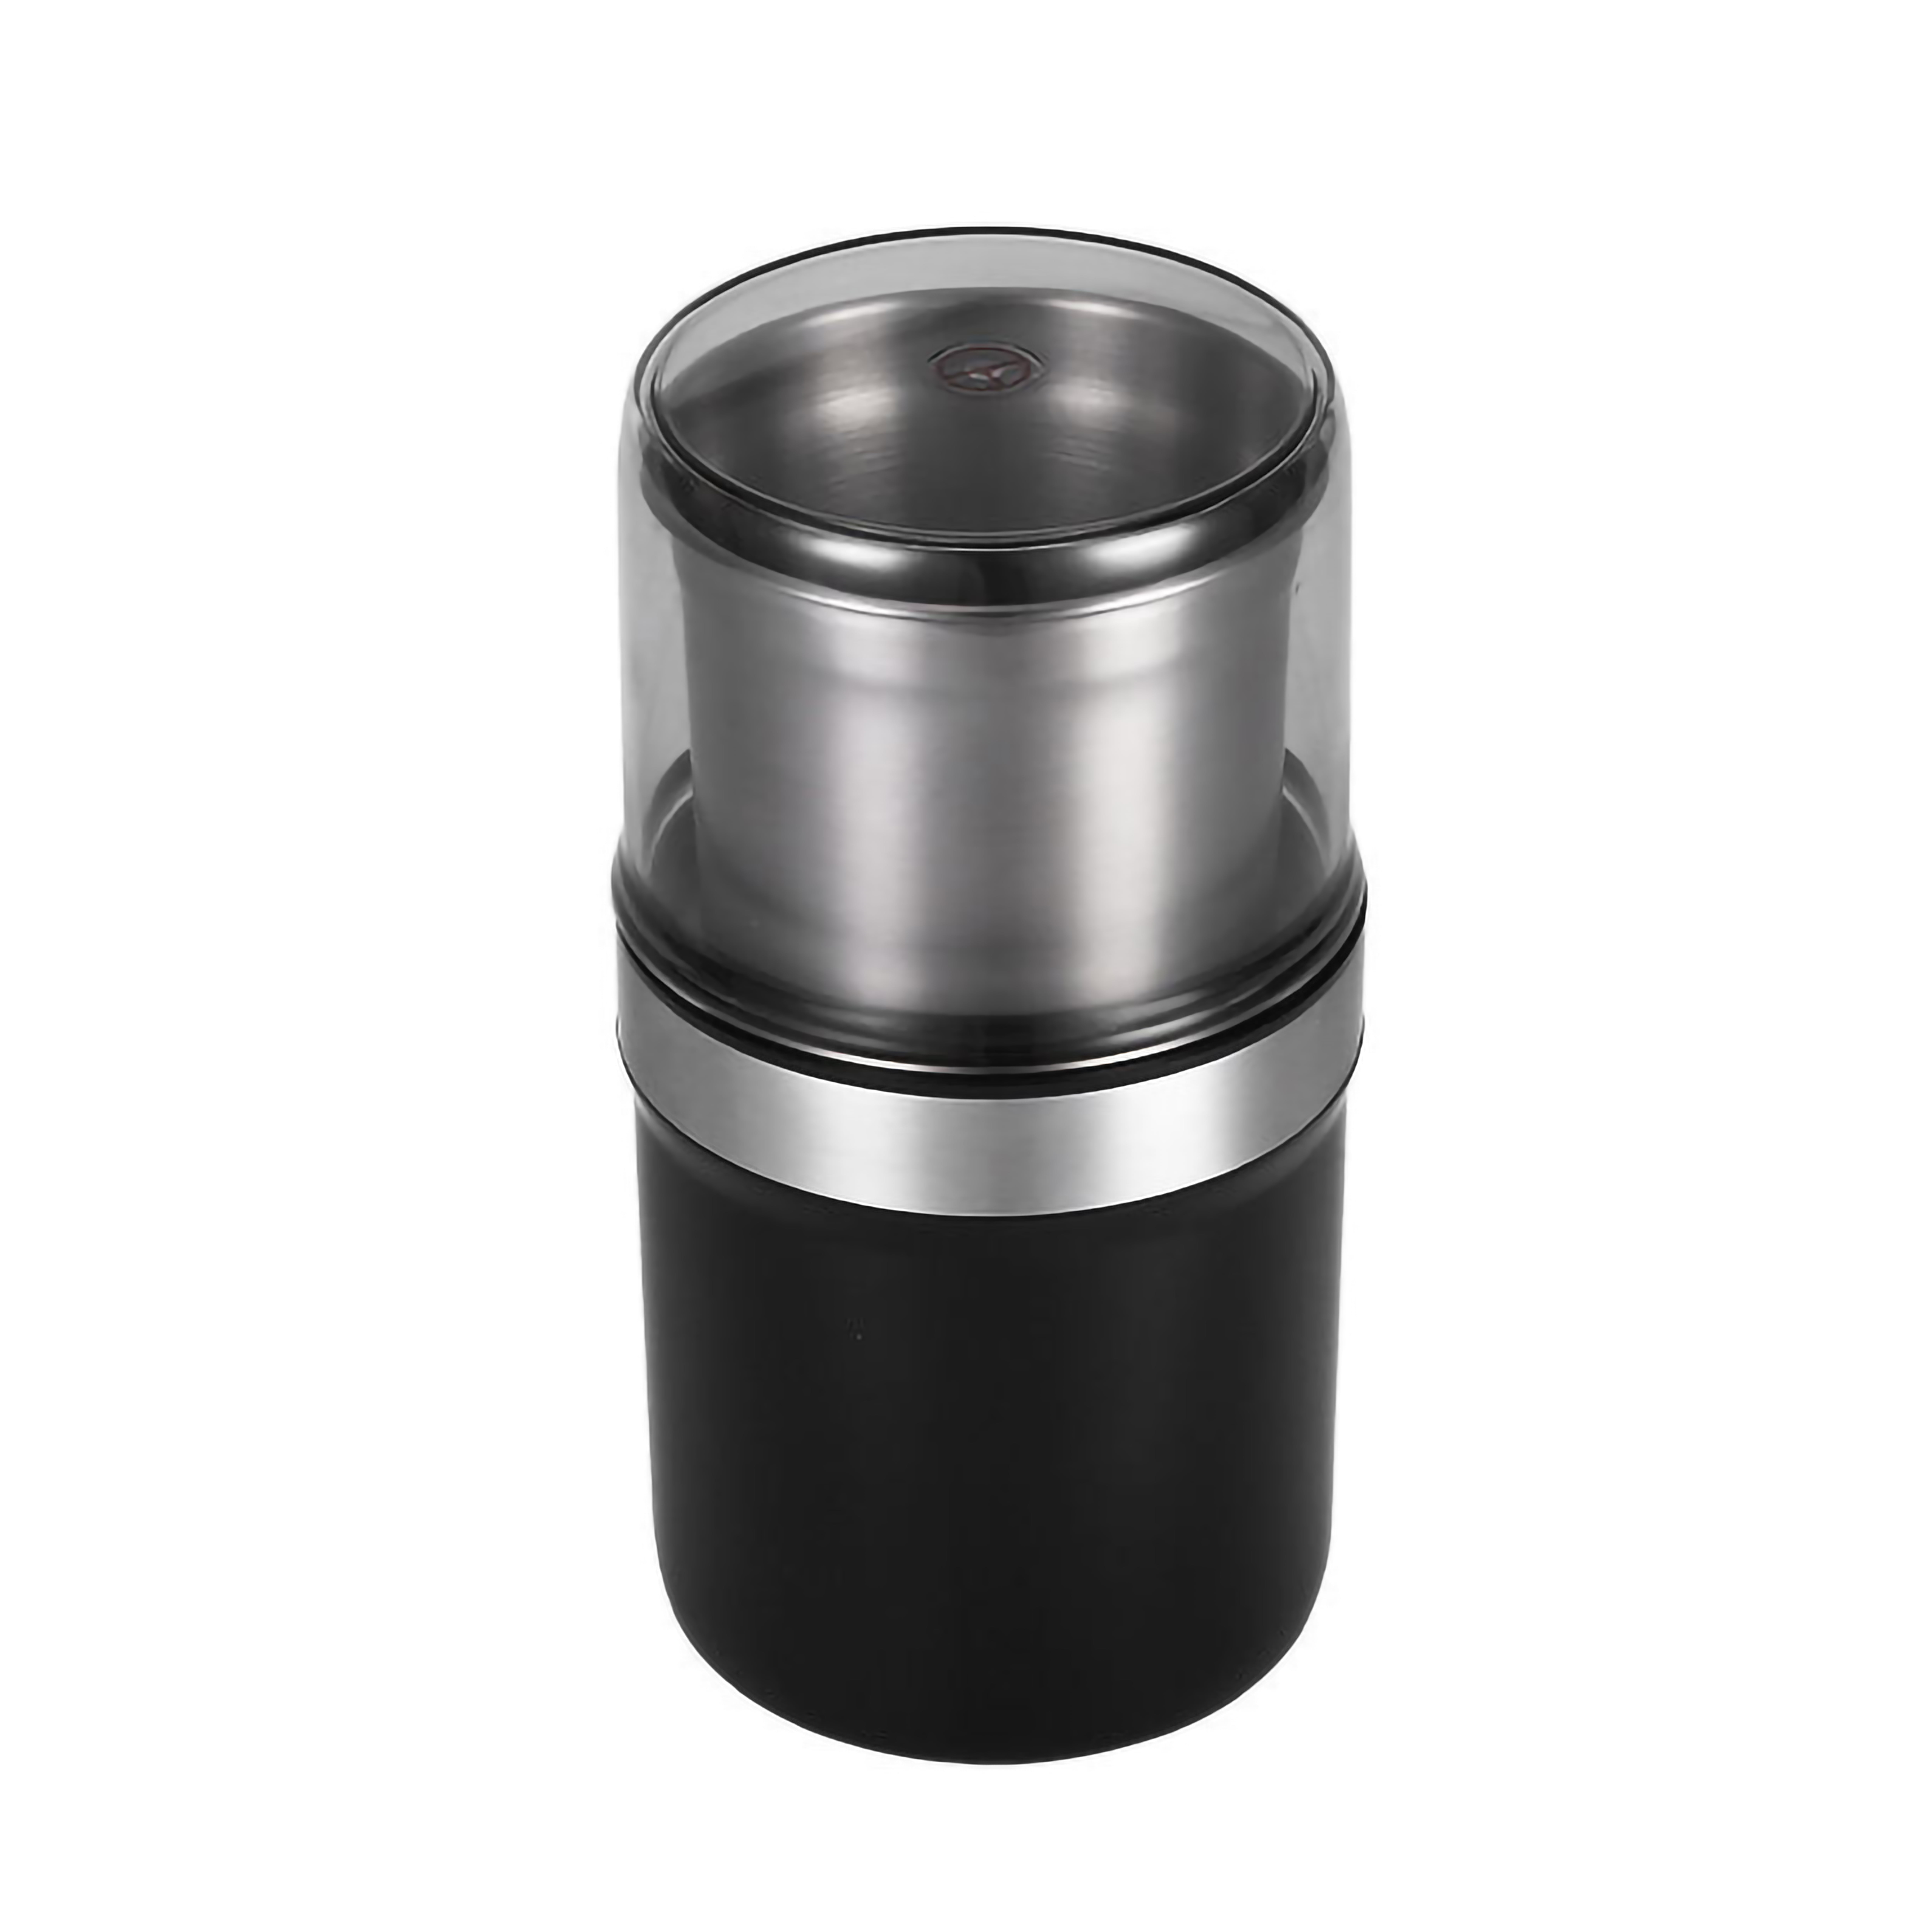 ZHENGHAI 4.23oz Large Capacity Electric Spice & Herb Grinder - Fast  Grinding For Coffee Bean, Nuts, Dry Spices, Herbs & Flower Buds - Includes  Cleanin